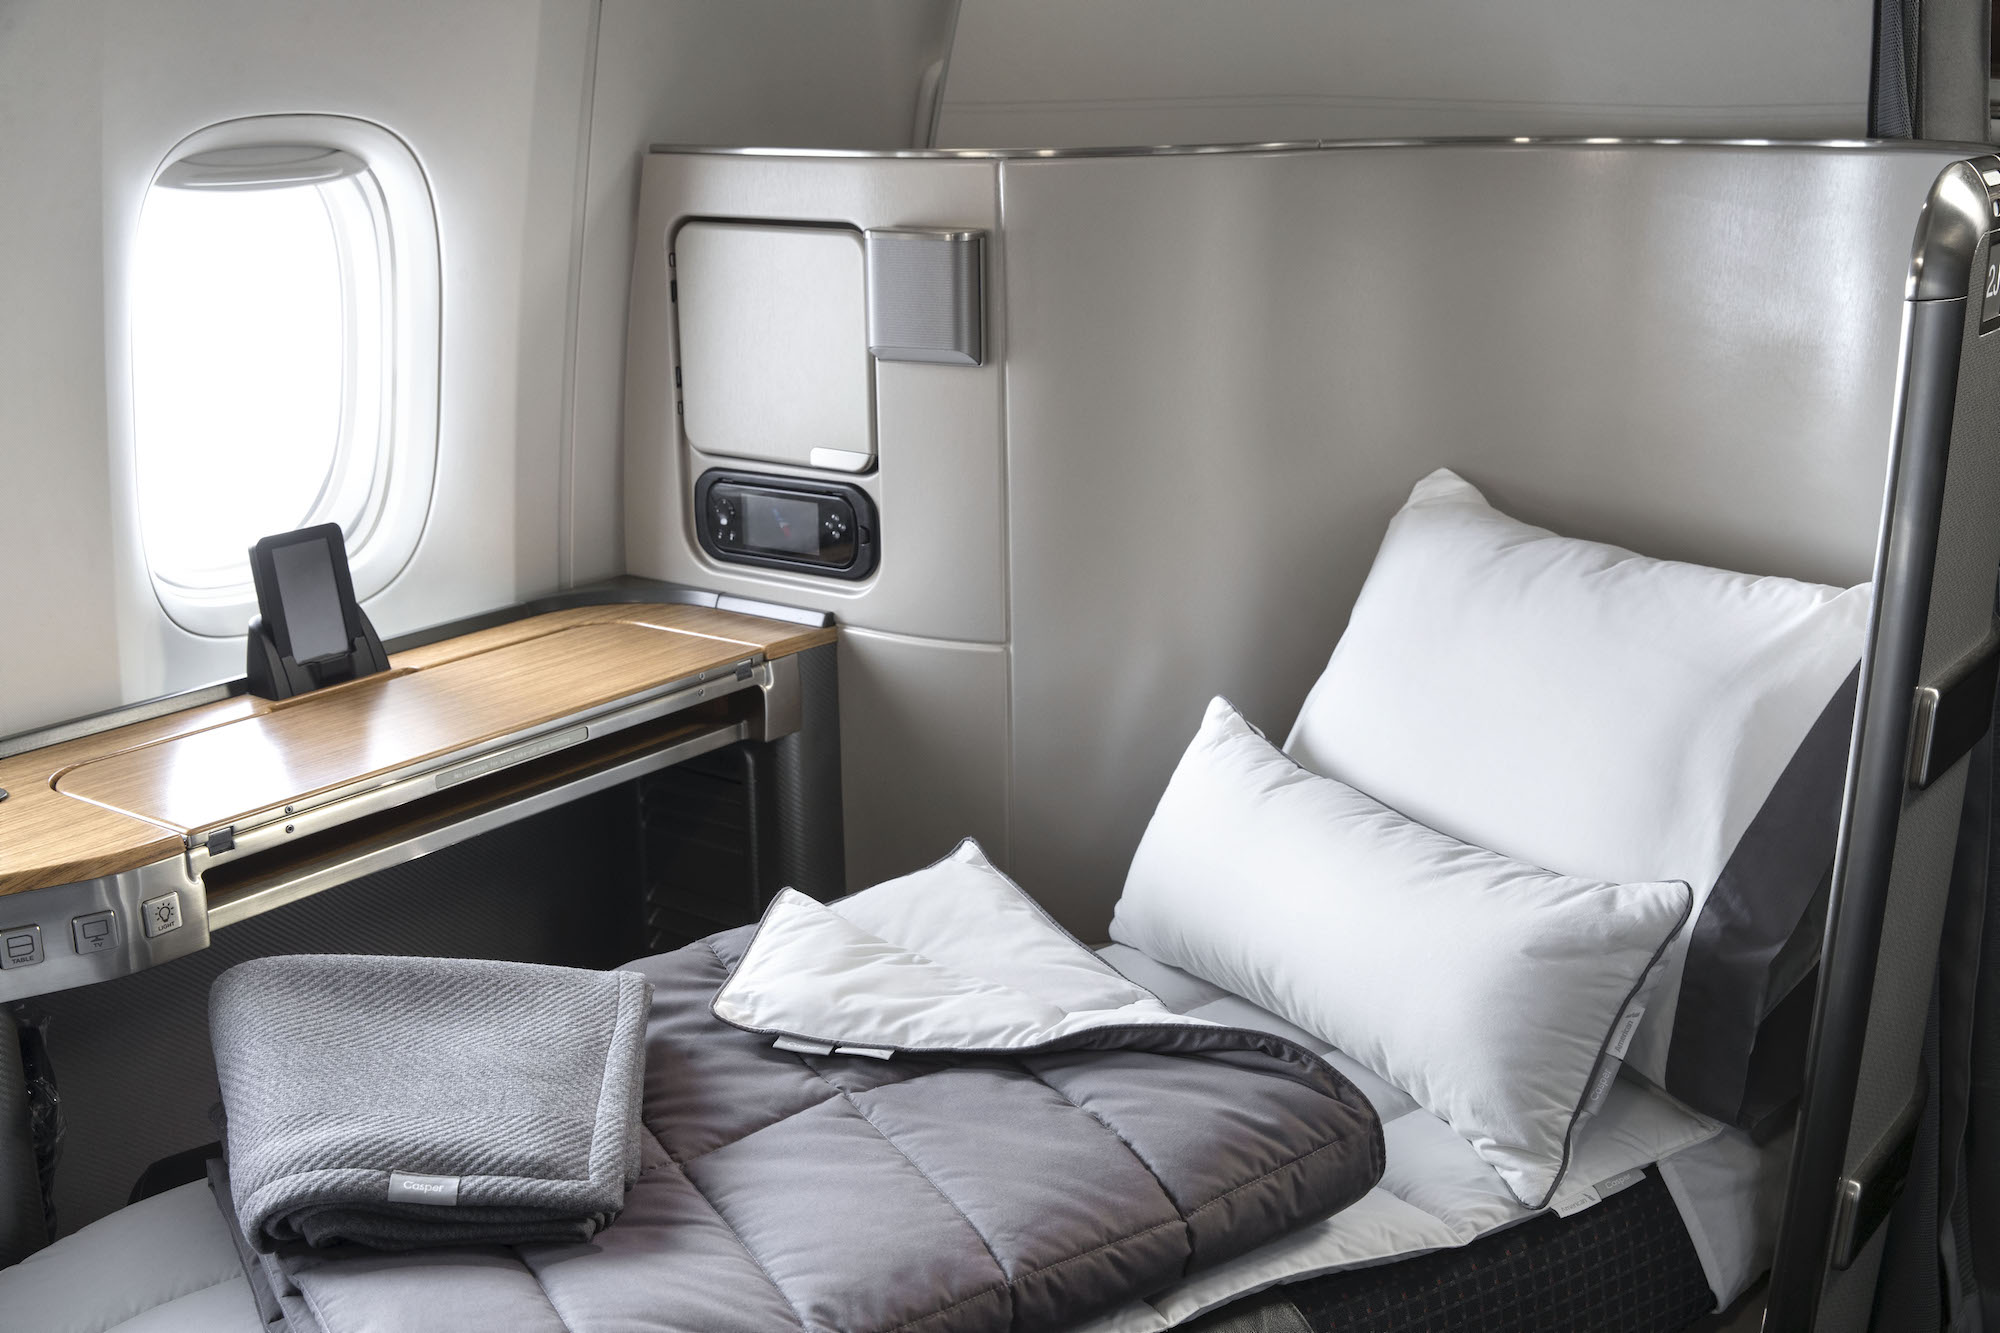 American Introduces In First Class What Delta Will Offer In Coach - Live  and Let's Fly